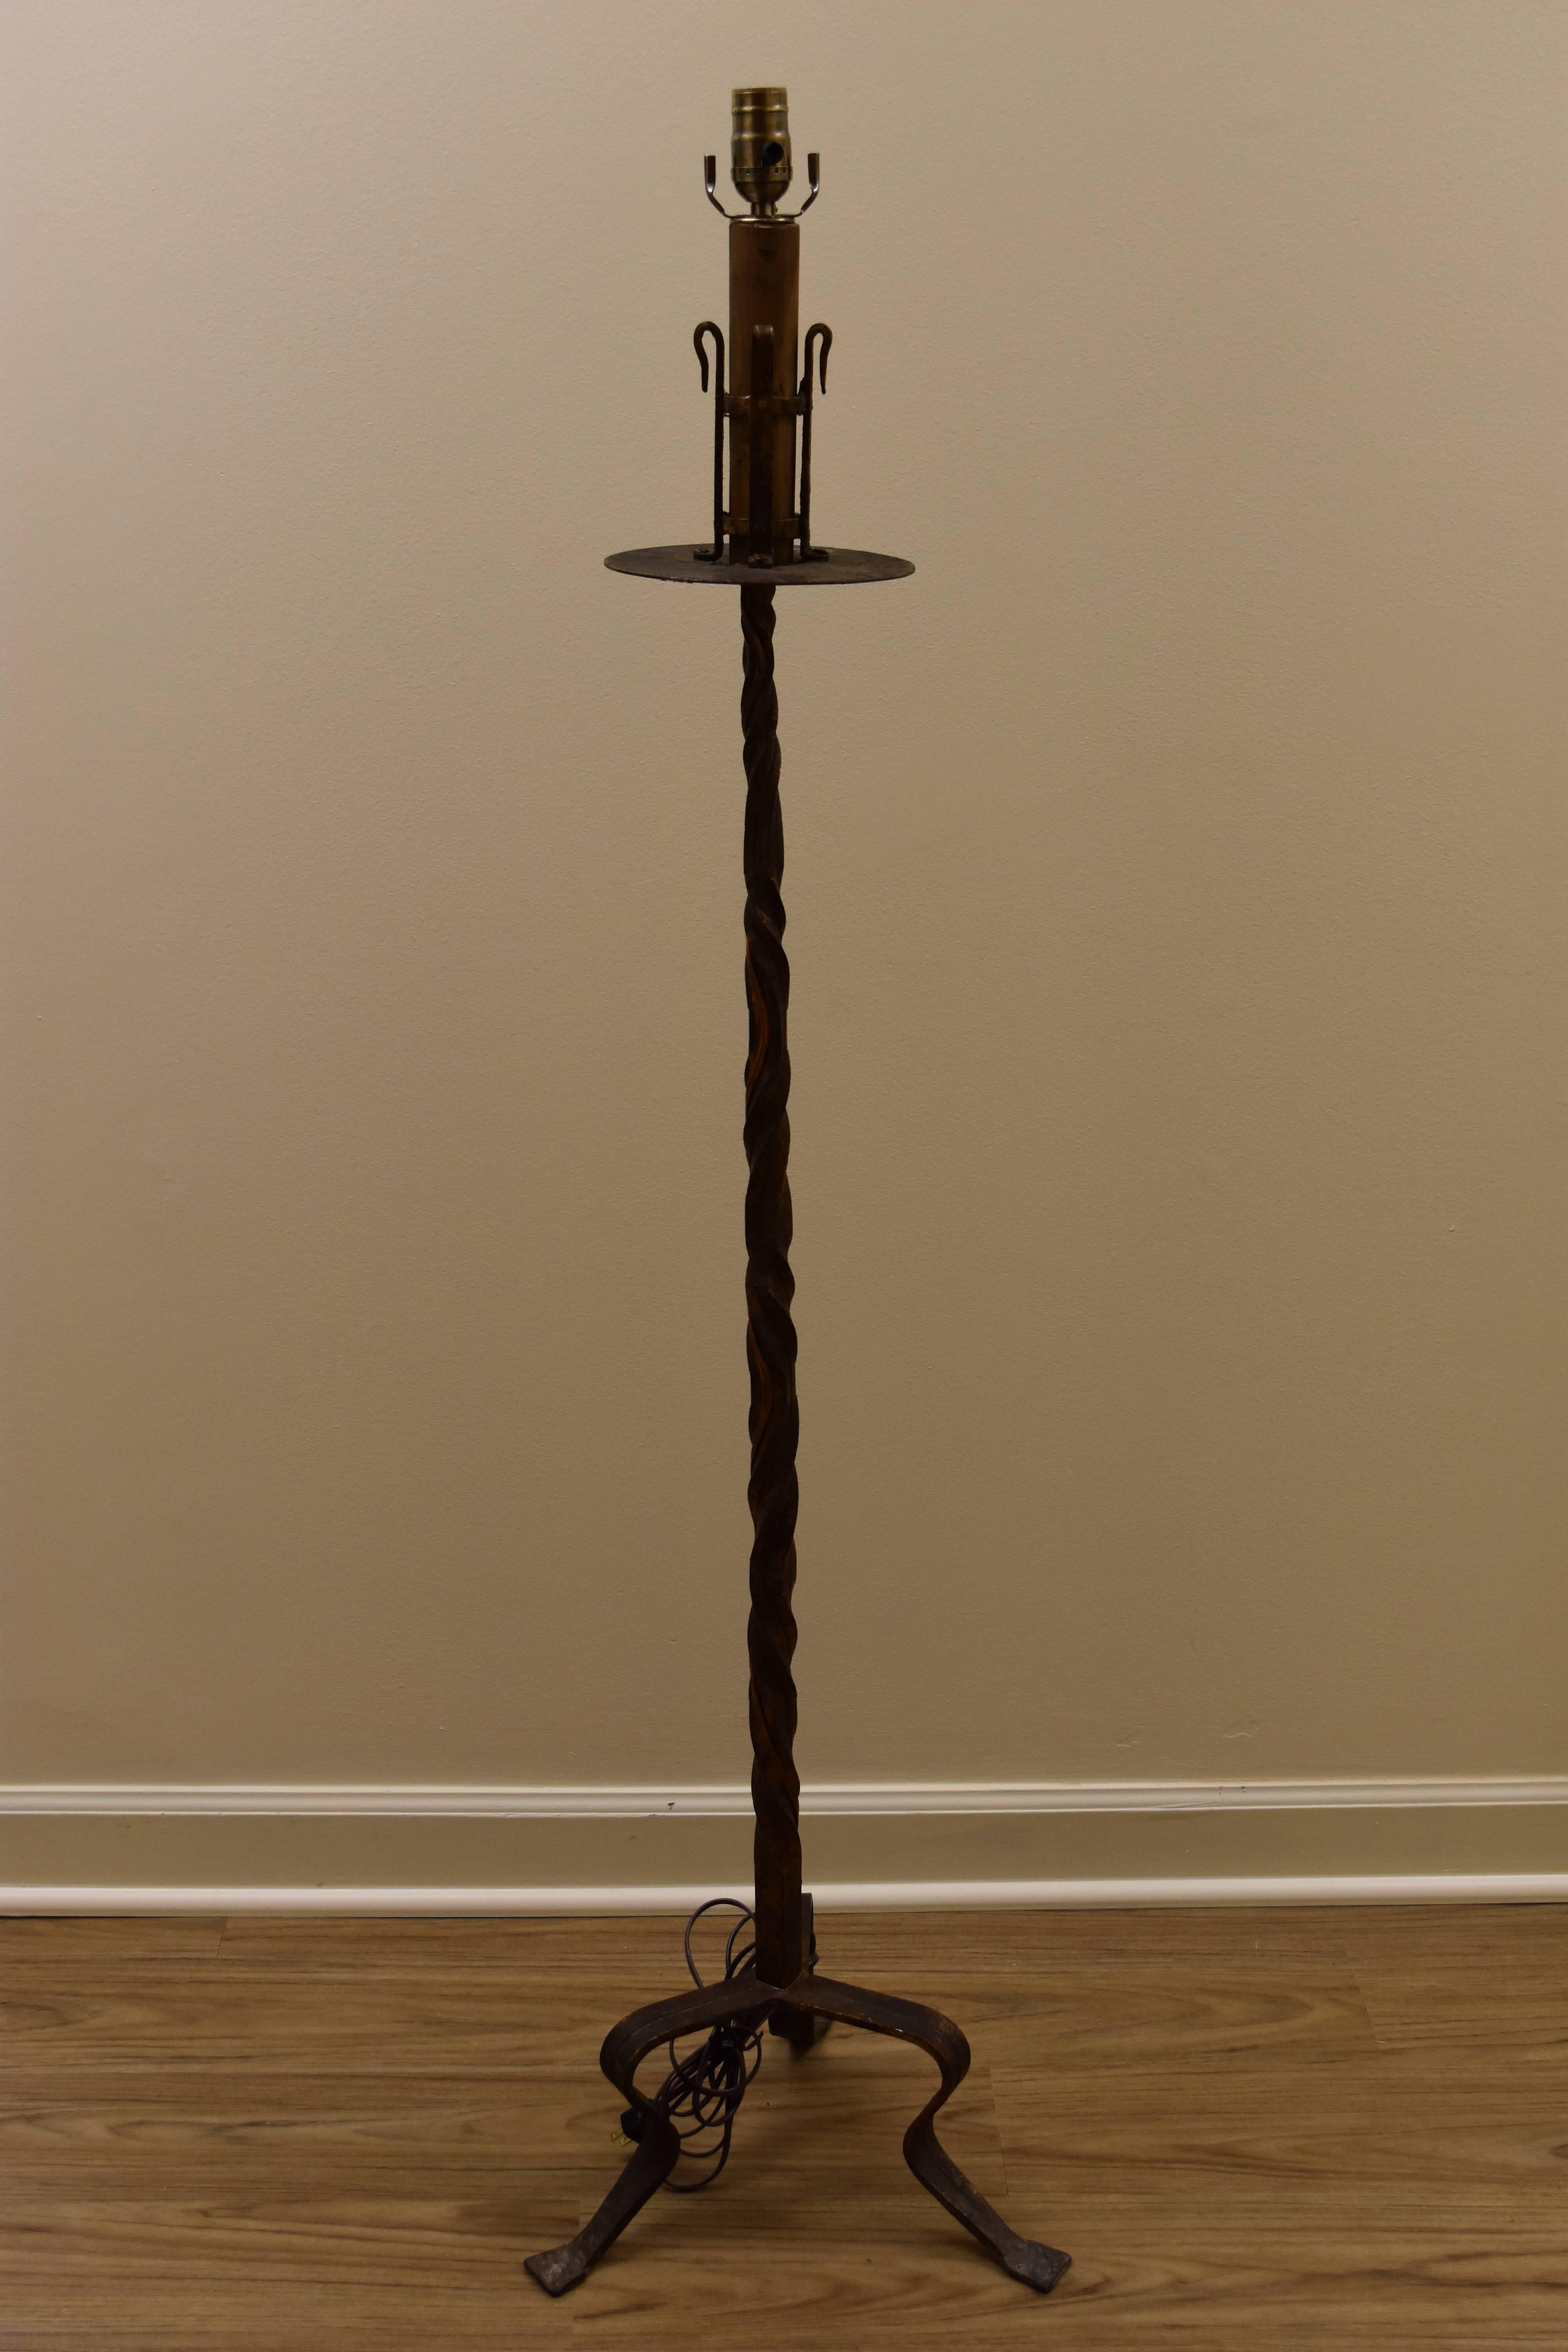 This iron floor lamp is from Barcelona and comes with the new linen drum shade and finial shown. This lamp has been newly rewired for American use and features a transitional design on the column with three legs at the base. The finish is a rich